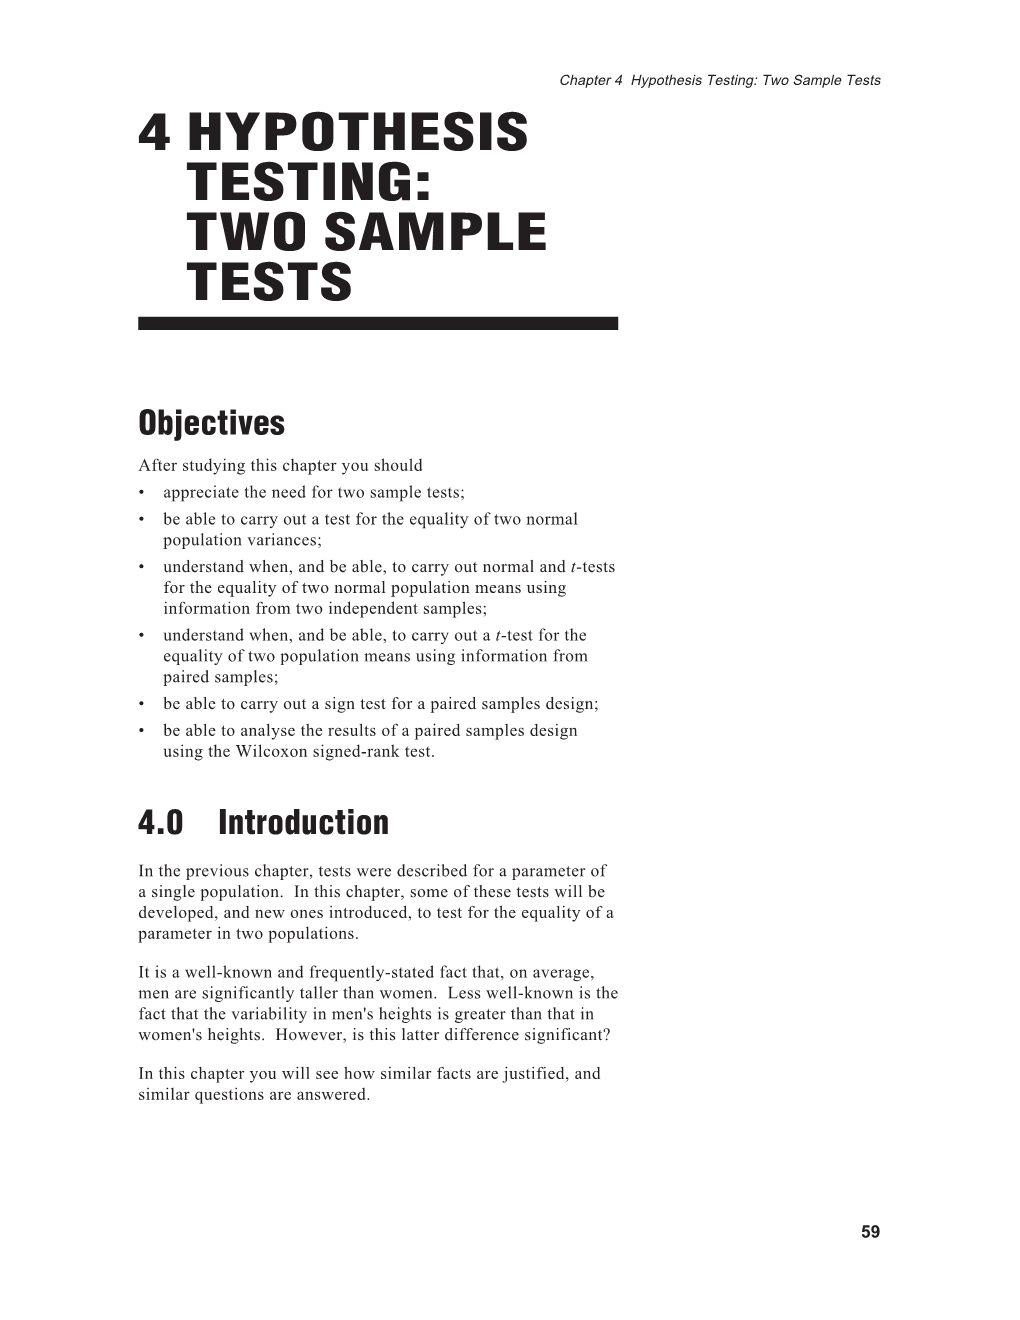 4 Hypothesis Testing: Two Sample Tests 4 HYPOTHESIS TESTING: TWO SAMPLE TESTS